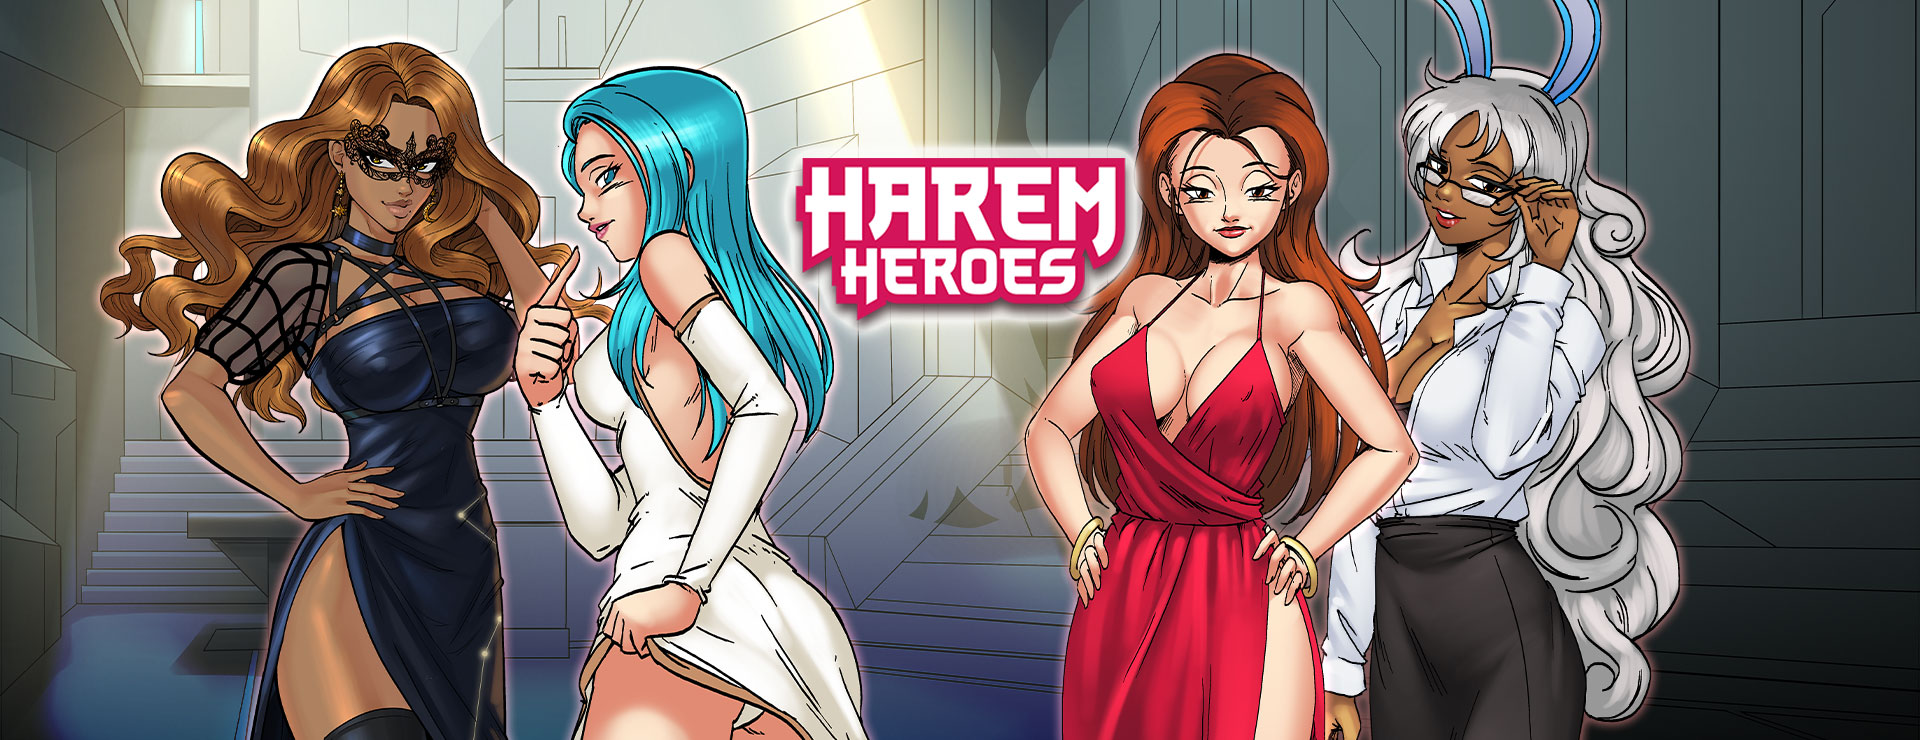 Harem Heroes Game - Action Adventure Game